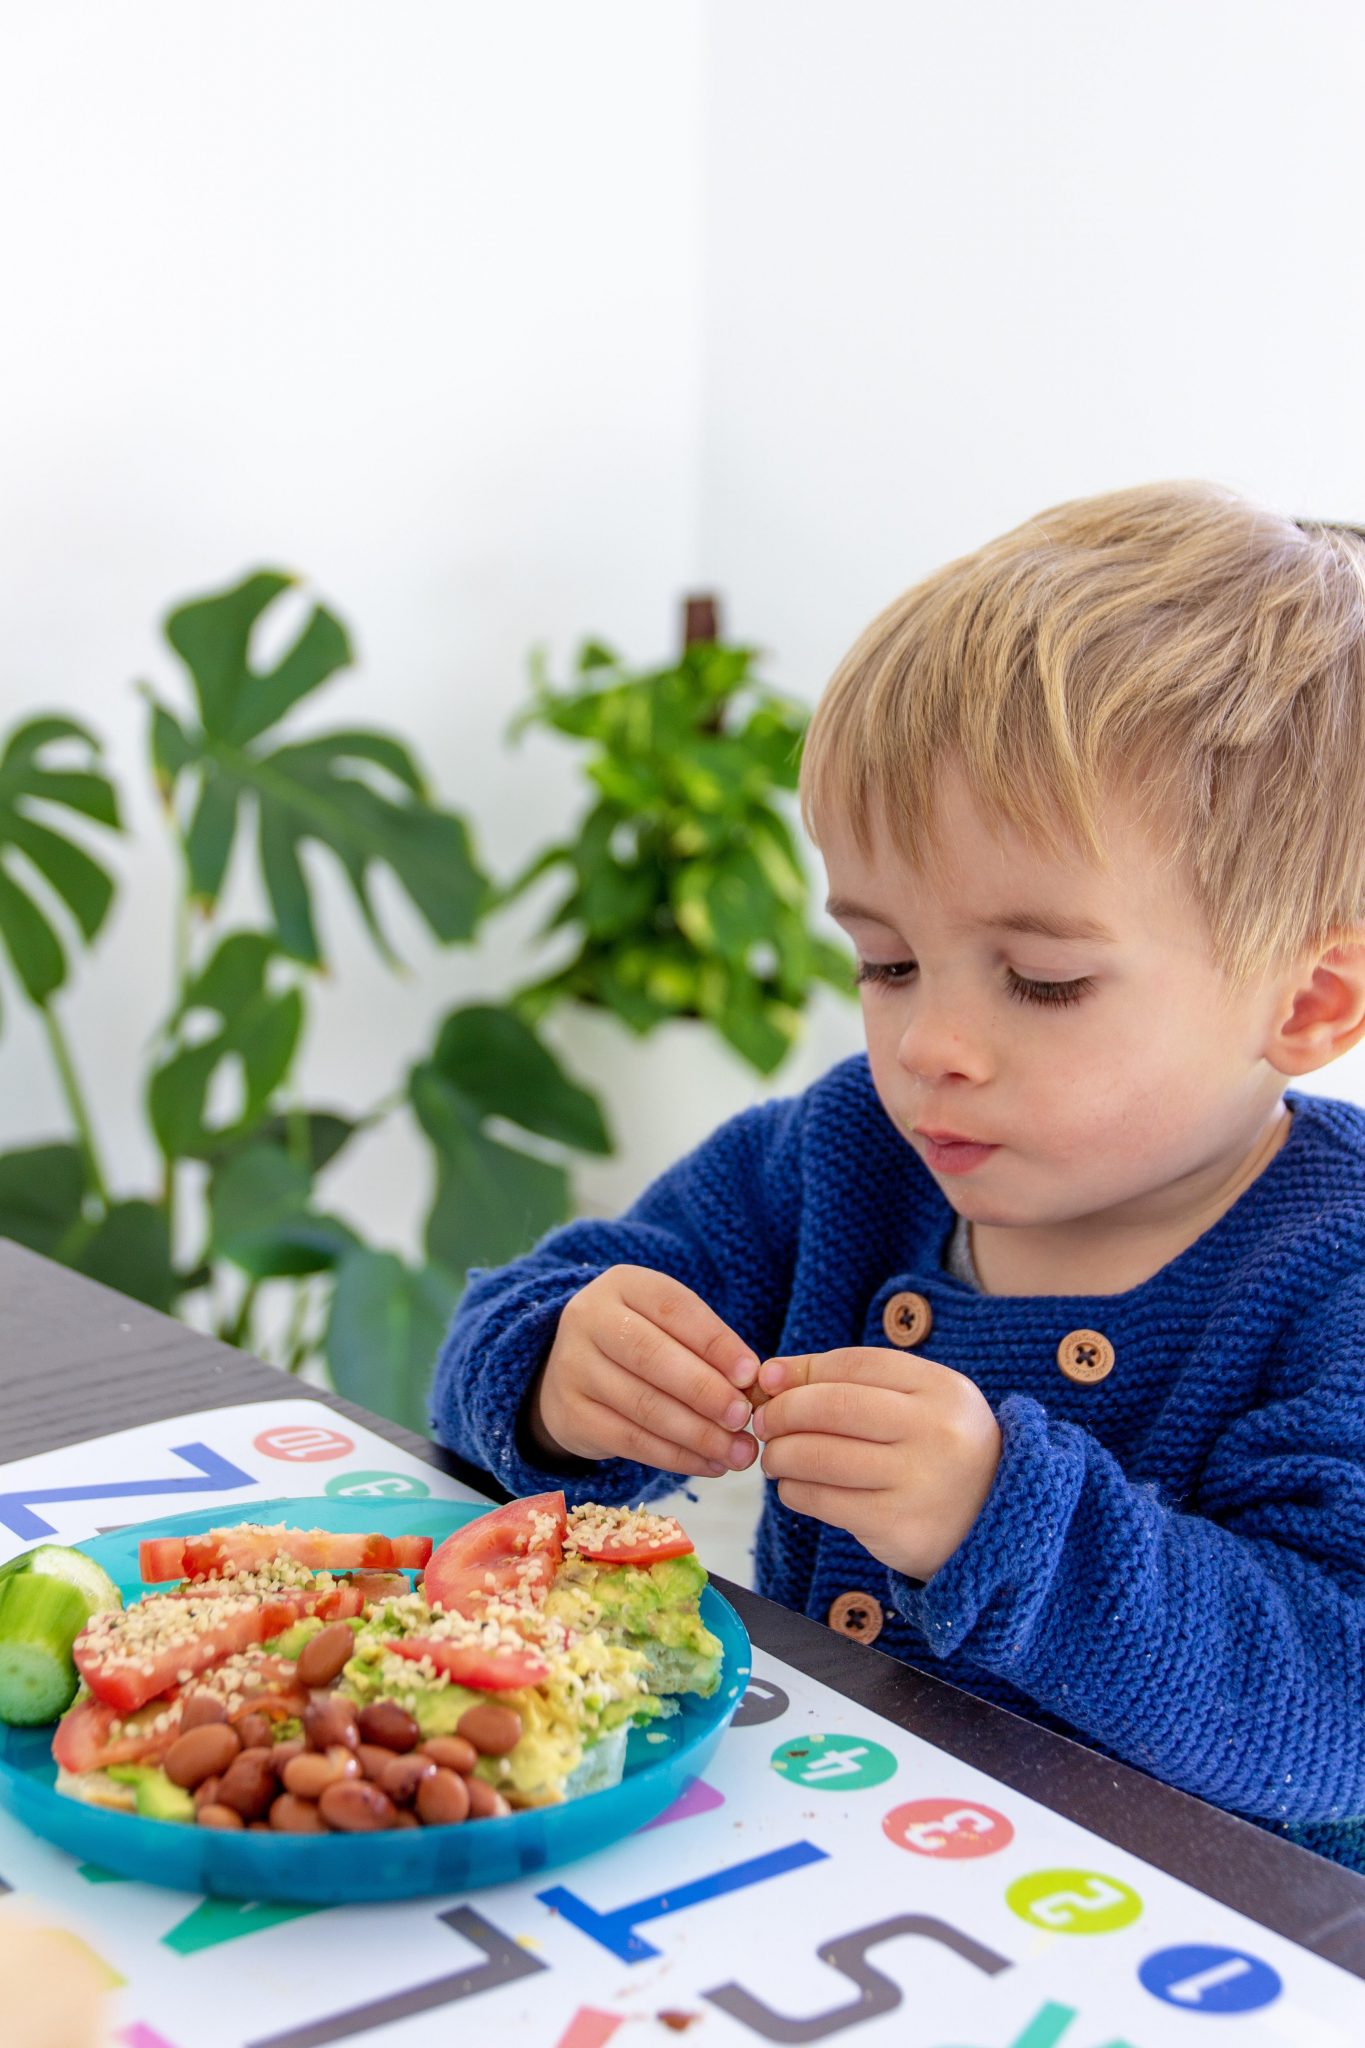 5 Meal Time Tips for Toddlers